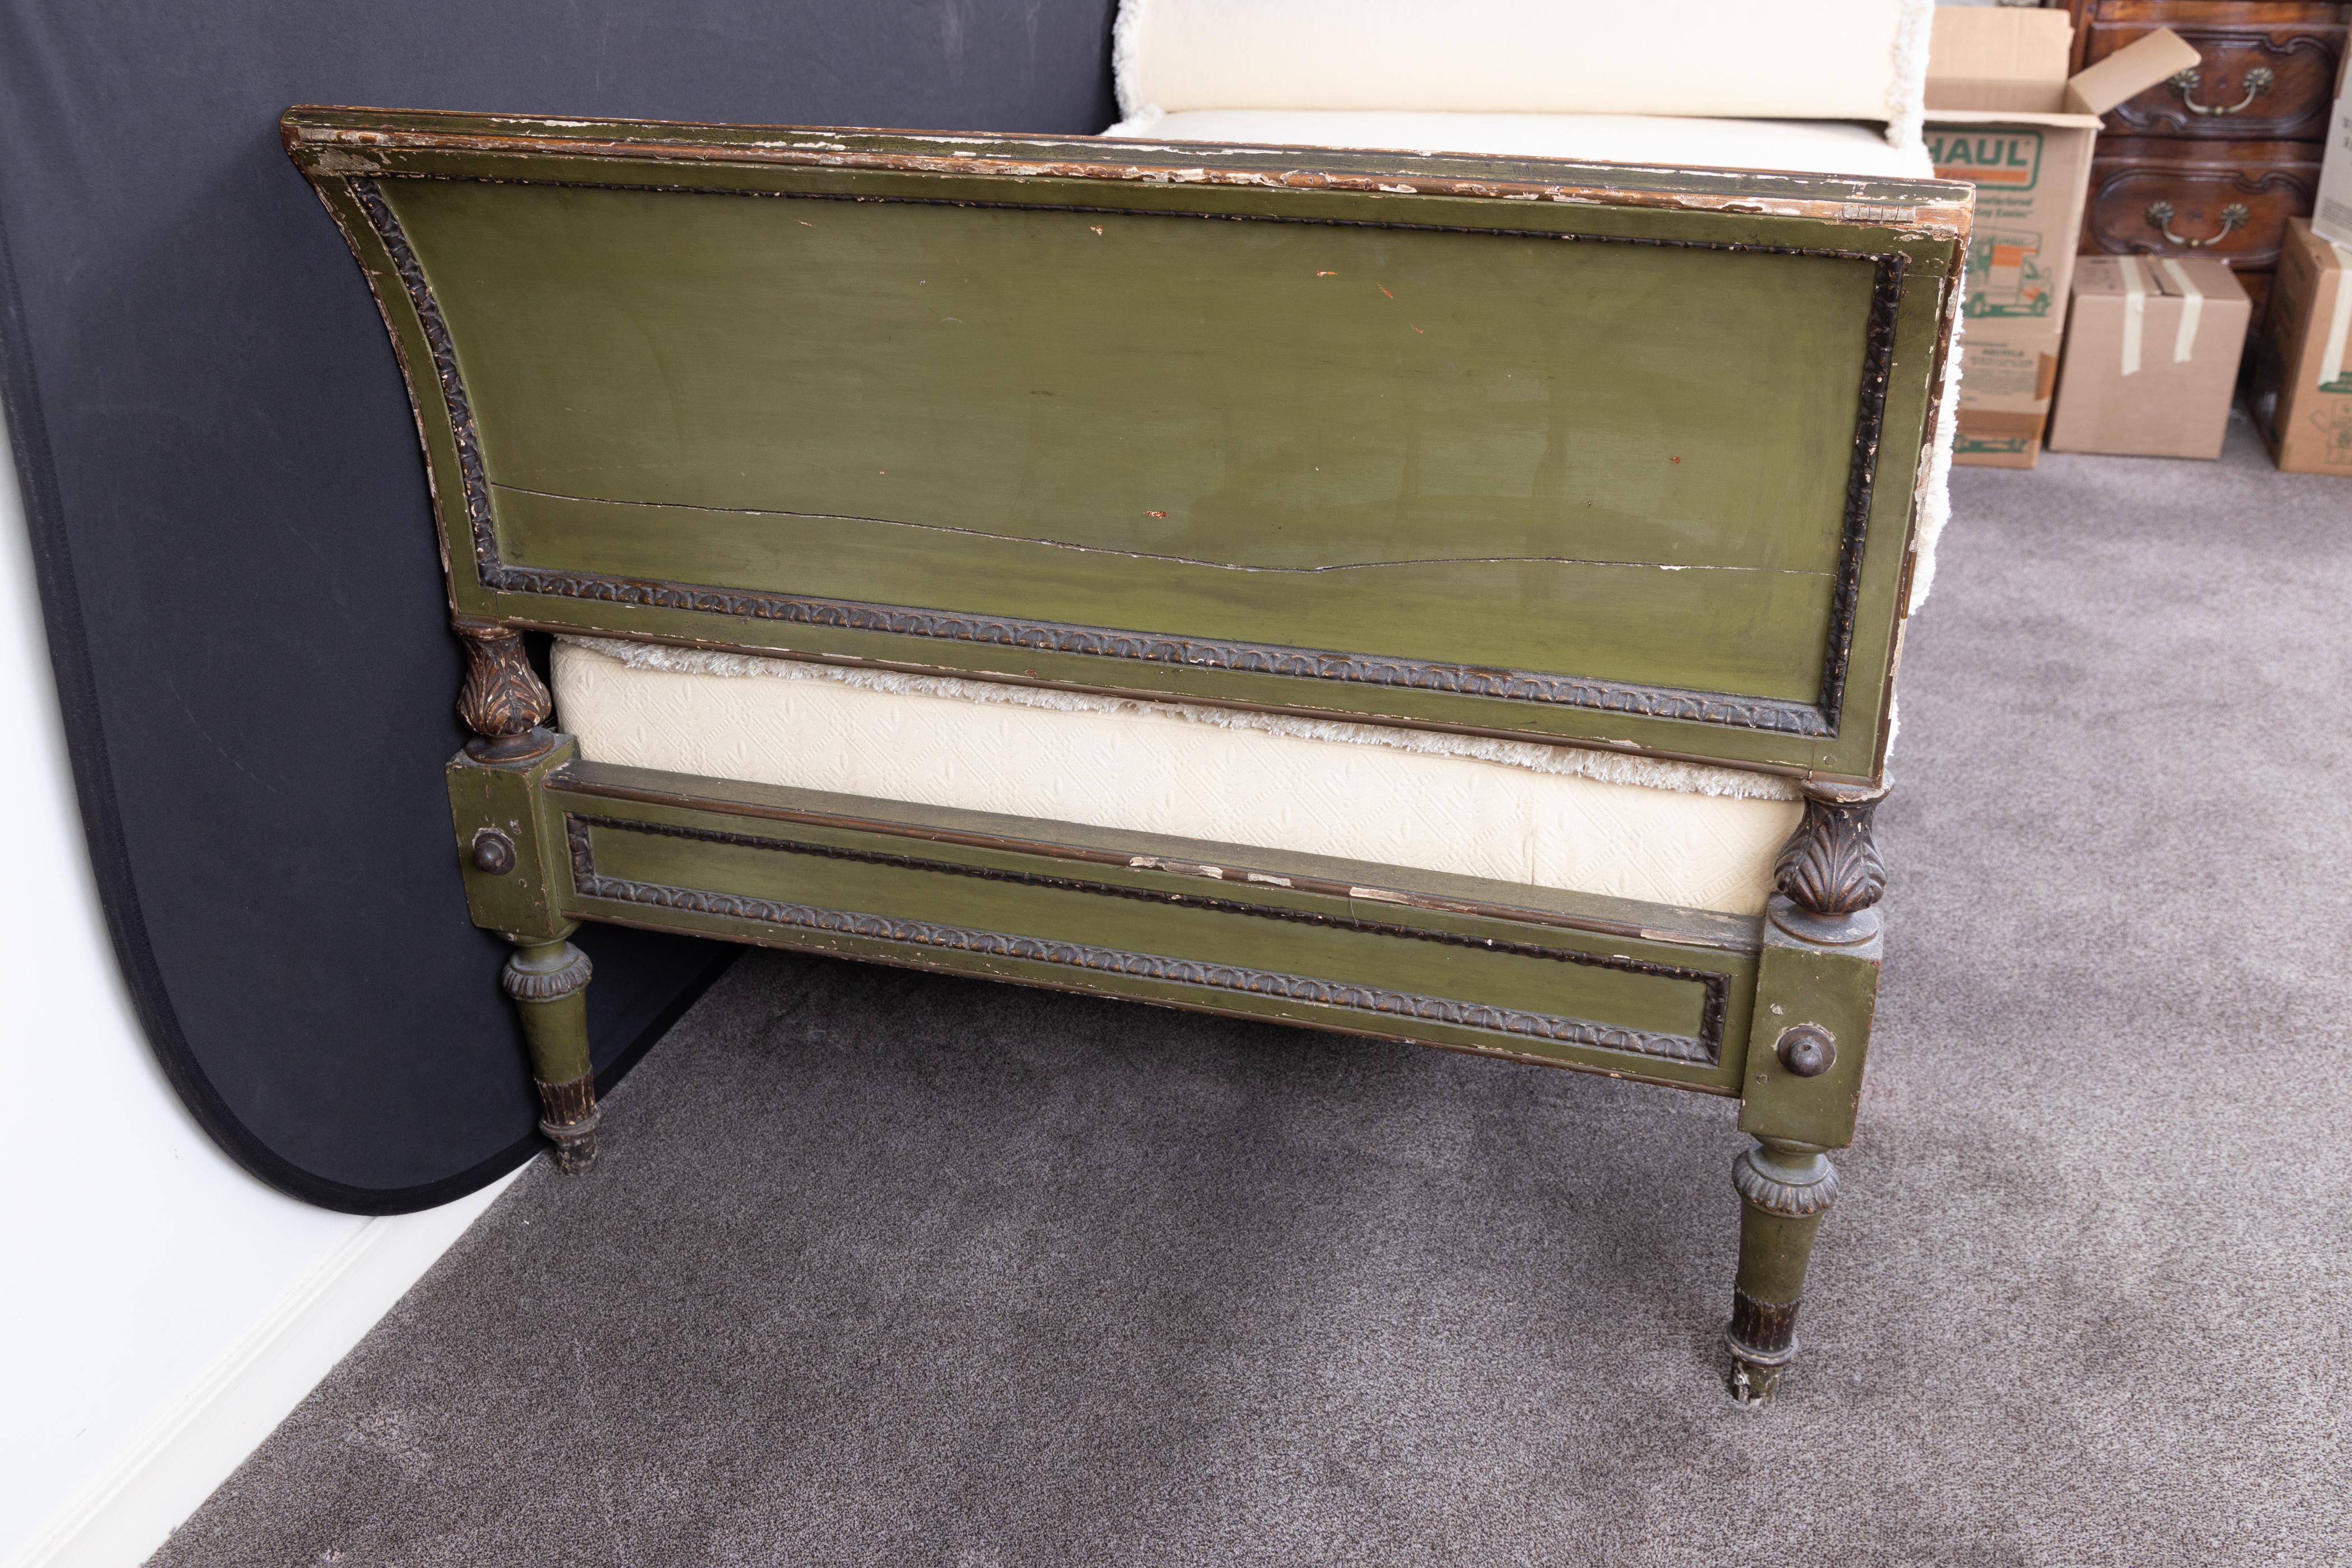 French 18th century carved and painted Louis XVI daybed in the form of a sleigh bed, with a beautiful patina of the classic French green paint. This kind of furniture was used in the eighteenth century, against the wall, with several pillows and